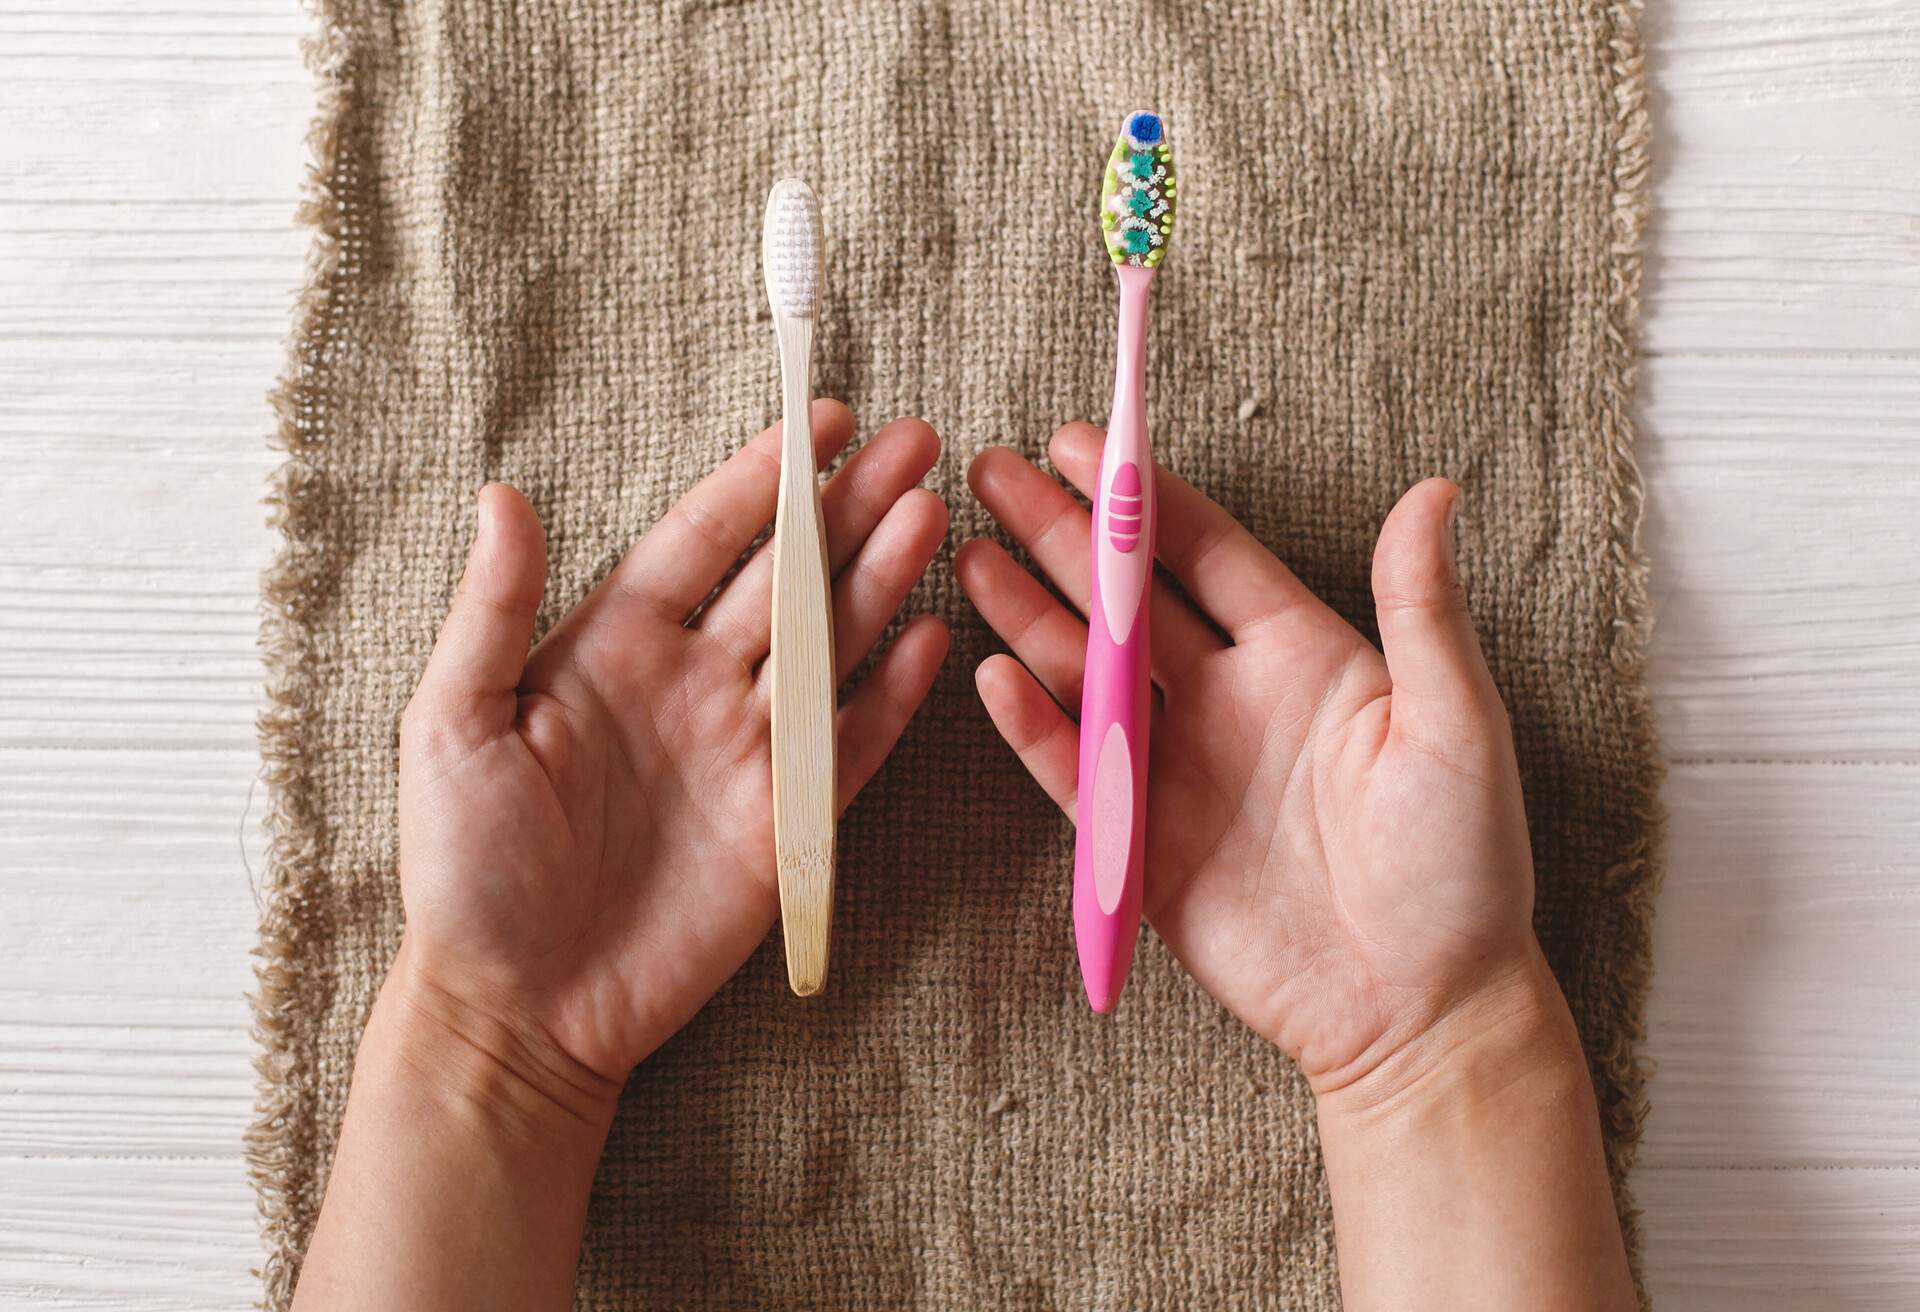 hand holding eco natural bamboo toothbrush and in other hand plastic toothbrush, flat lay on rustic background. sustainable lifestyle concept. zero waste. choice plastic free items; Shutterstock ID 1170203749; Purpose: Plastic free travel tips; Brand (KAYAK, Momondo, Any): momondo